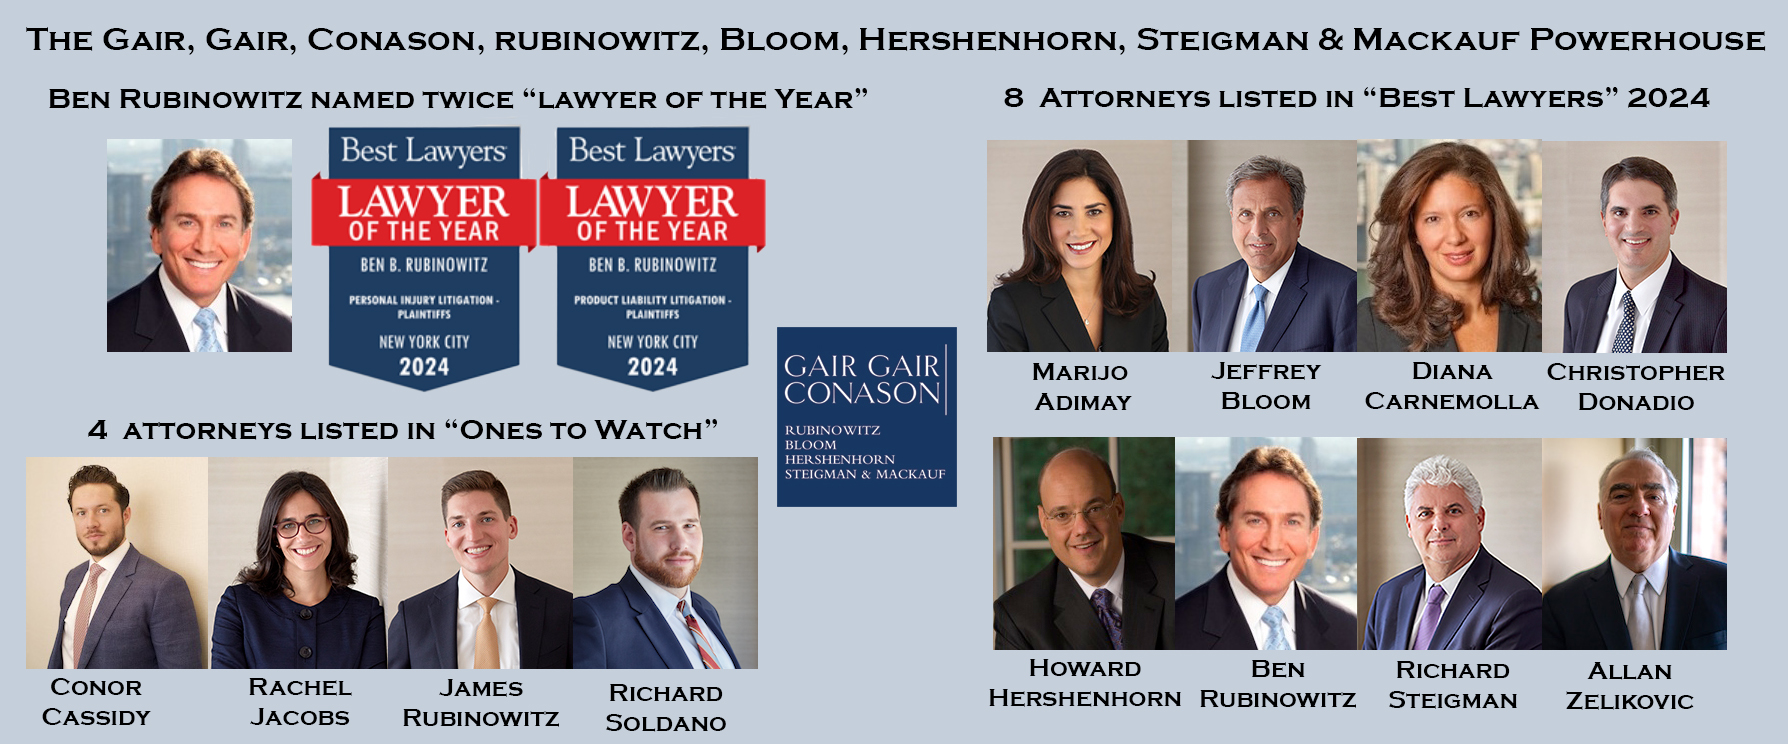 Best Lawyers 2024 a global triumph for our personal injury law firm